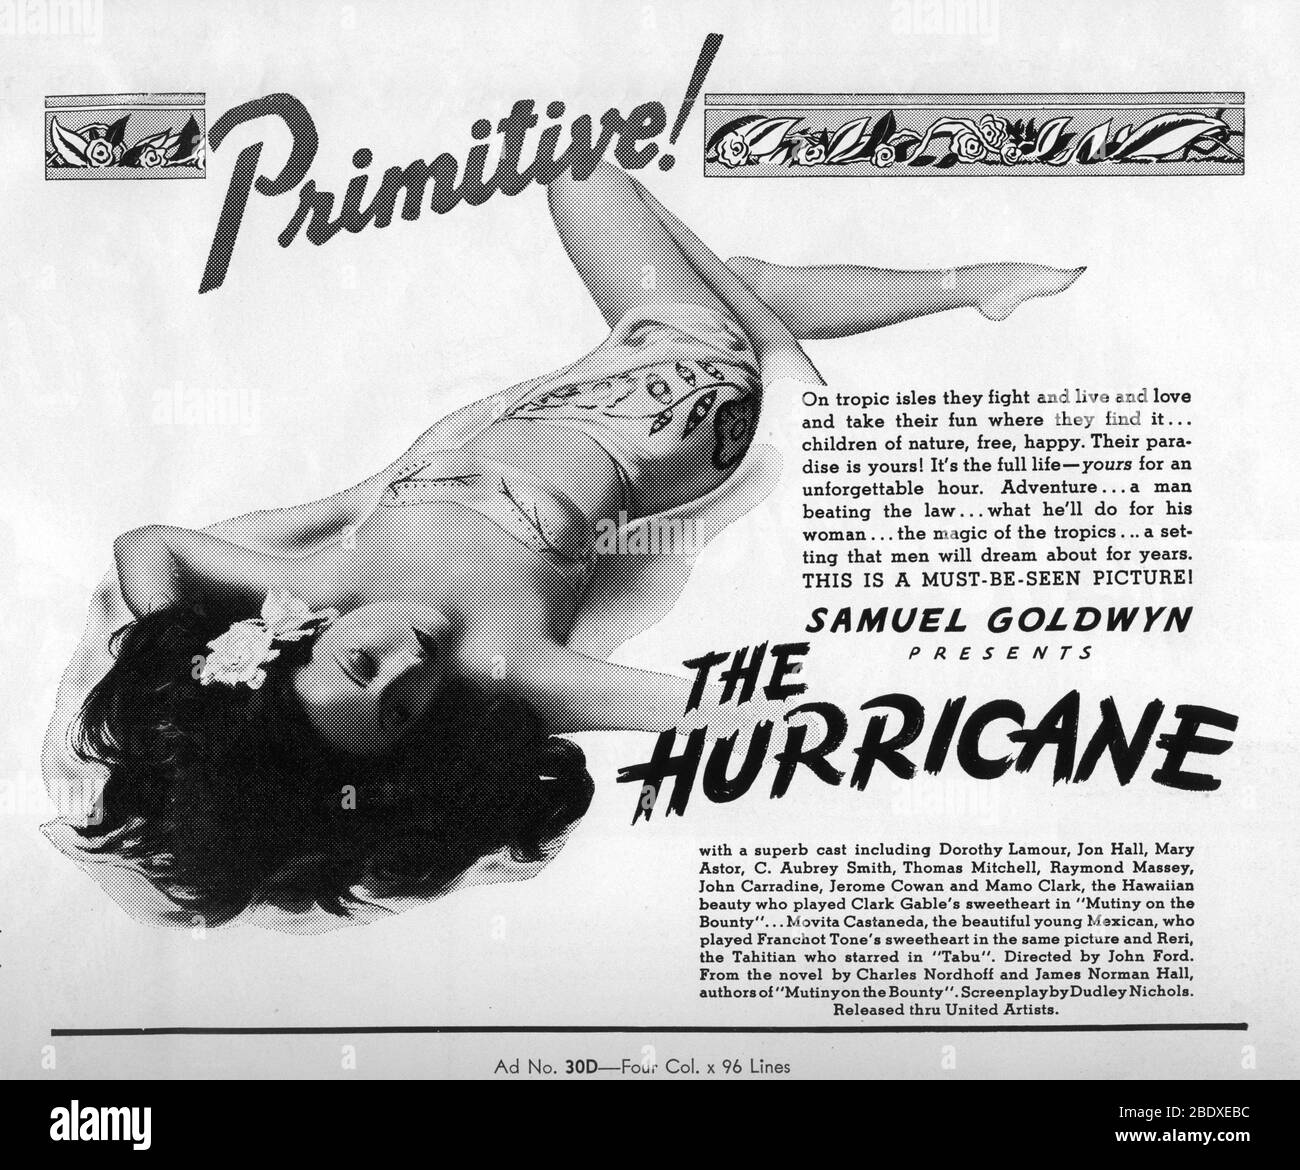 DOROTHY LAMOUR in THE HURRICANE 1937 director JOHN FORD  novel Charles Nordhoff and James Norman Hall special effects James Basevi The Samuel Goldwyn Company / United Artists Stock Photo